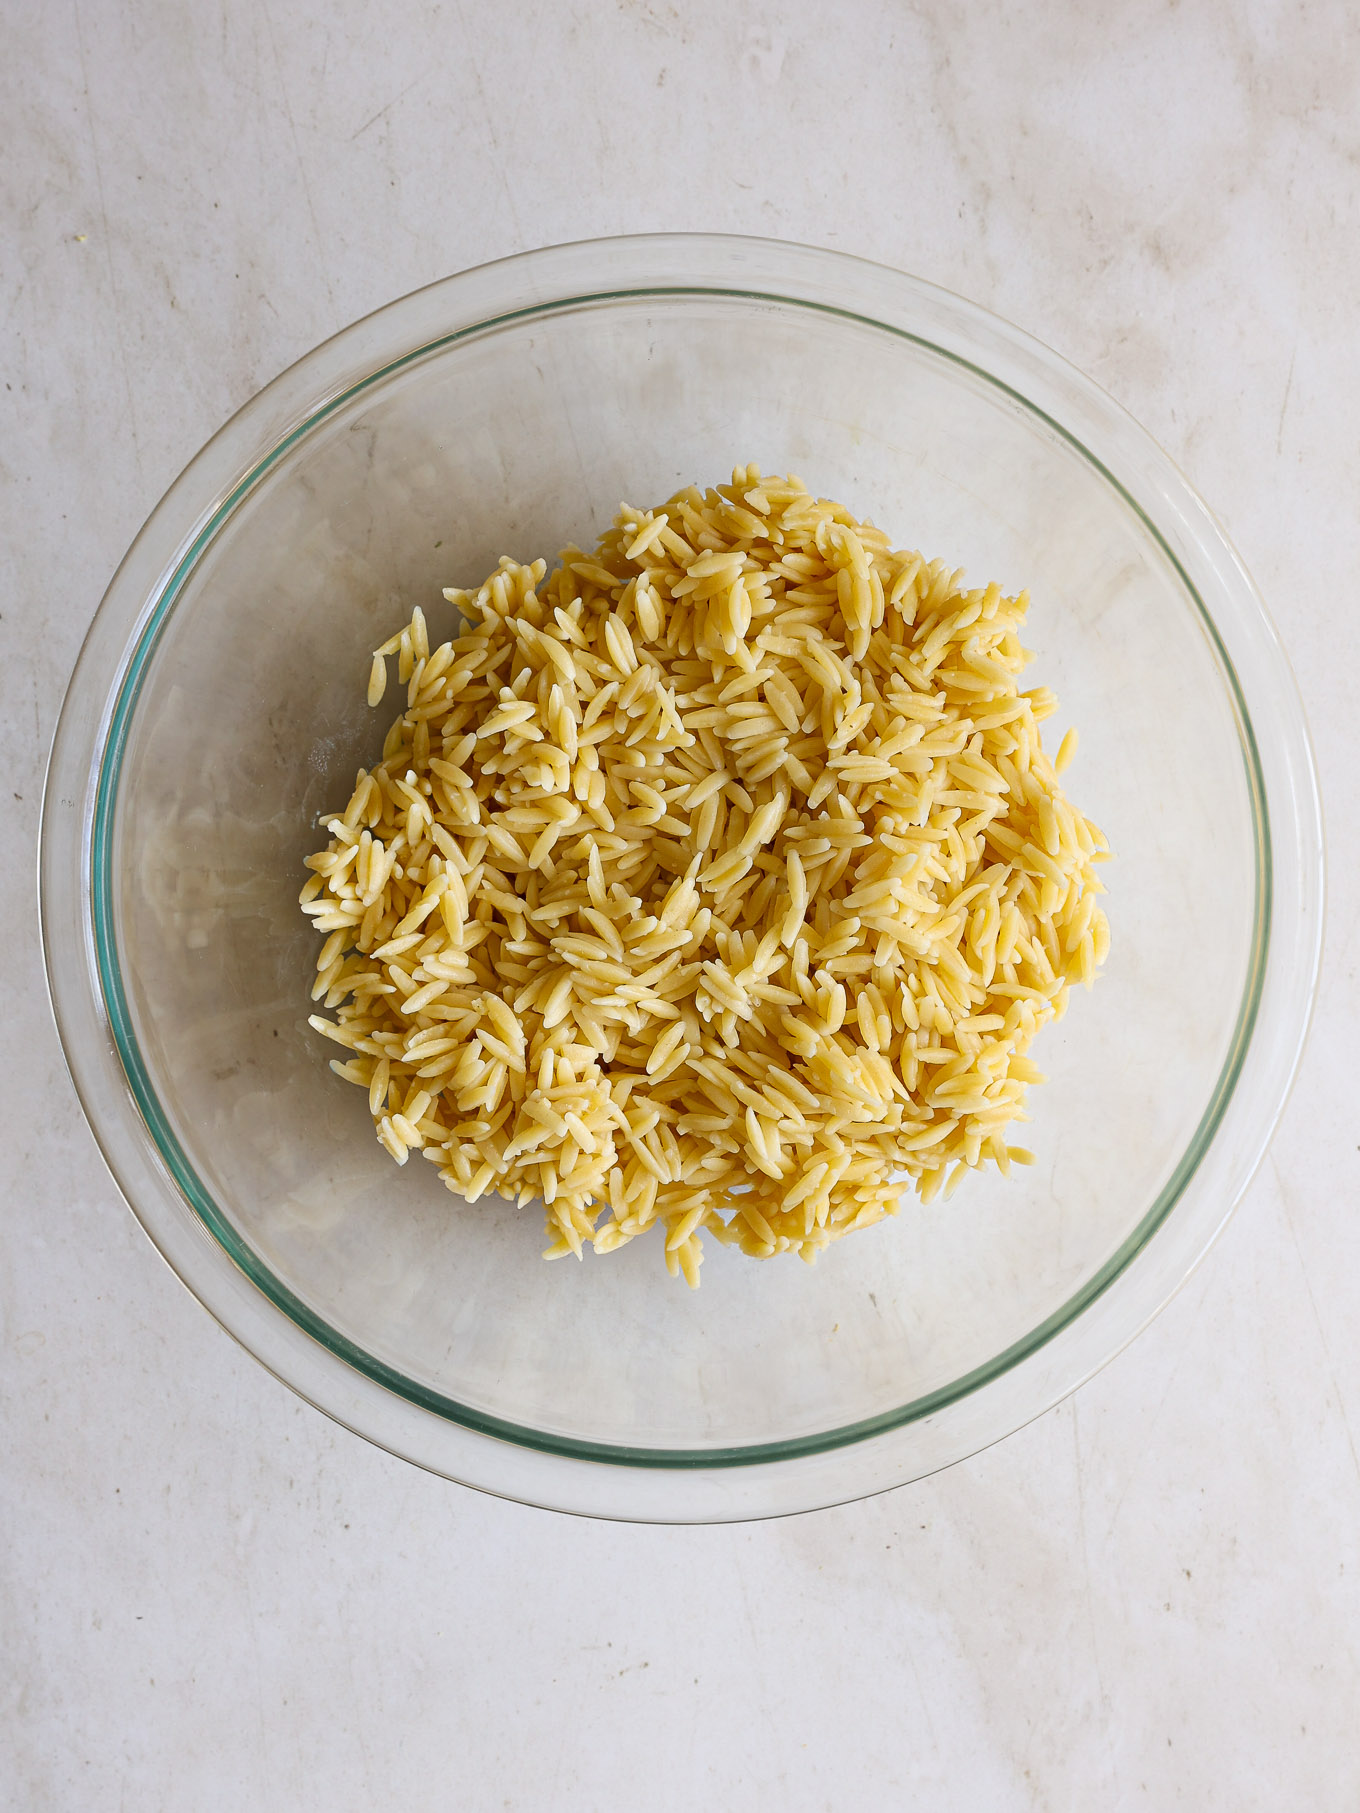 cooked orzo pasta in a glass bowl.